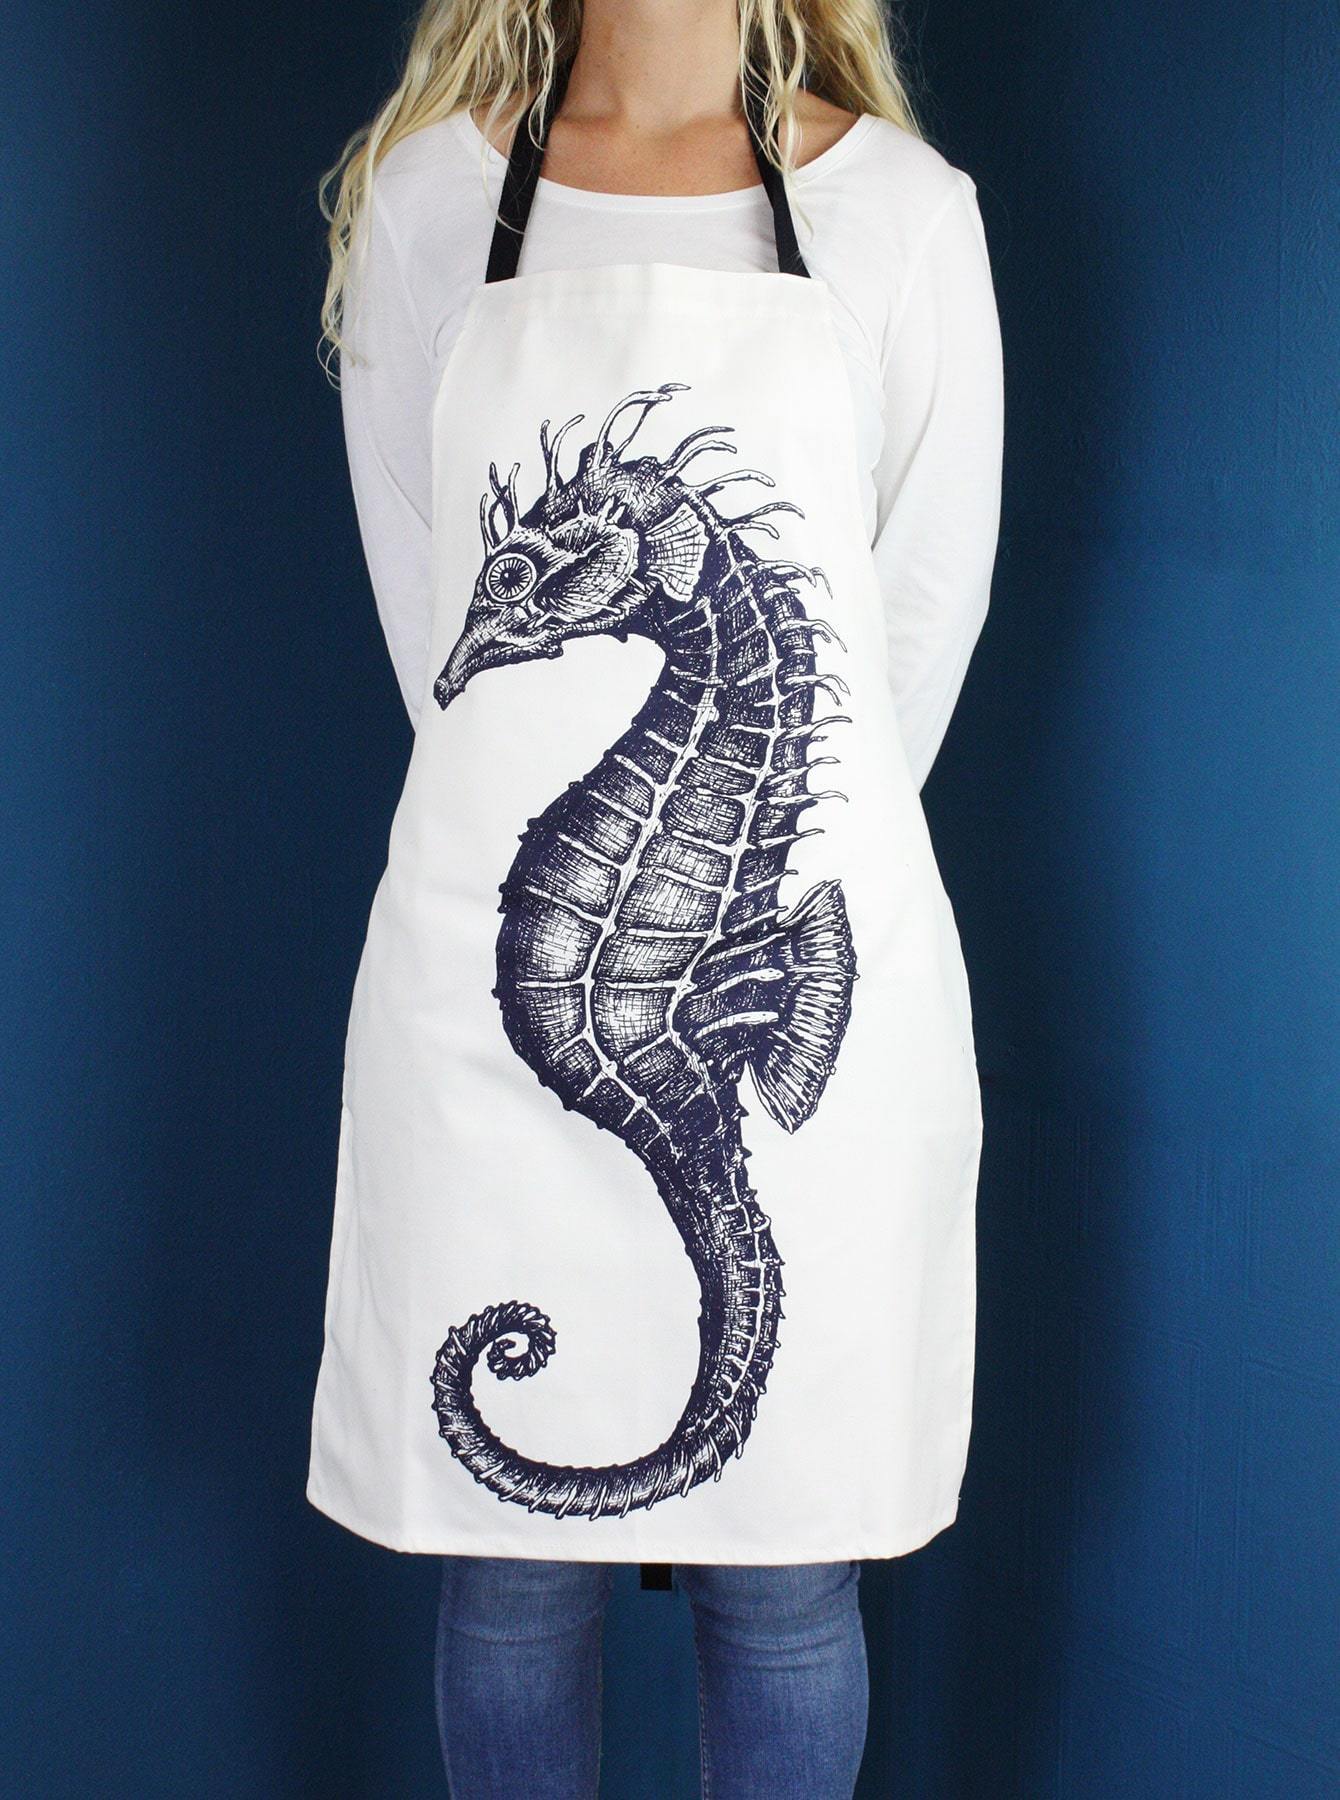 Blue And White Printed Cotton Apron With Seahorse Design -Kitchen & Dining- Cream Cornwall